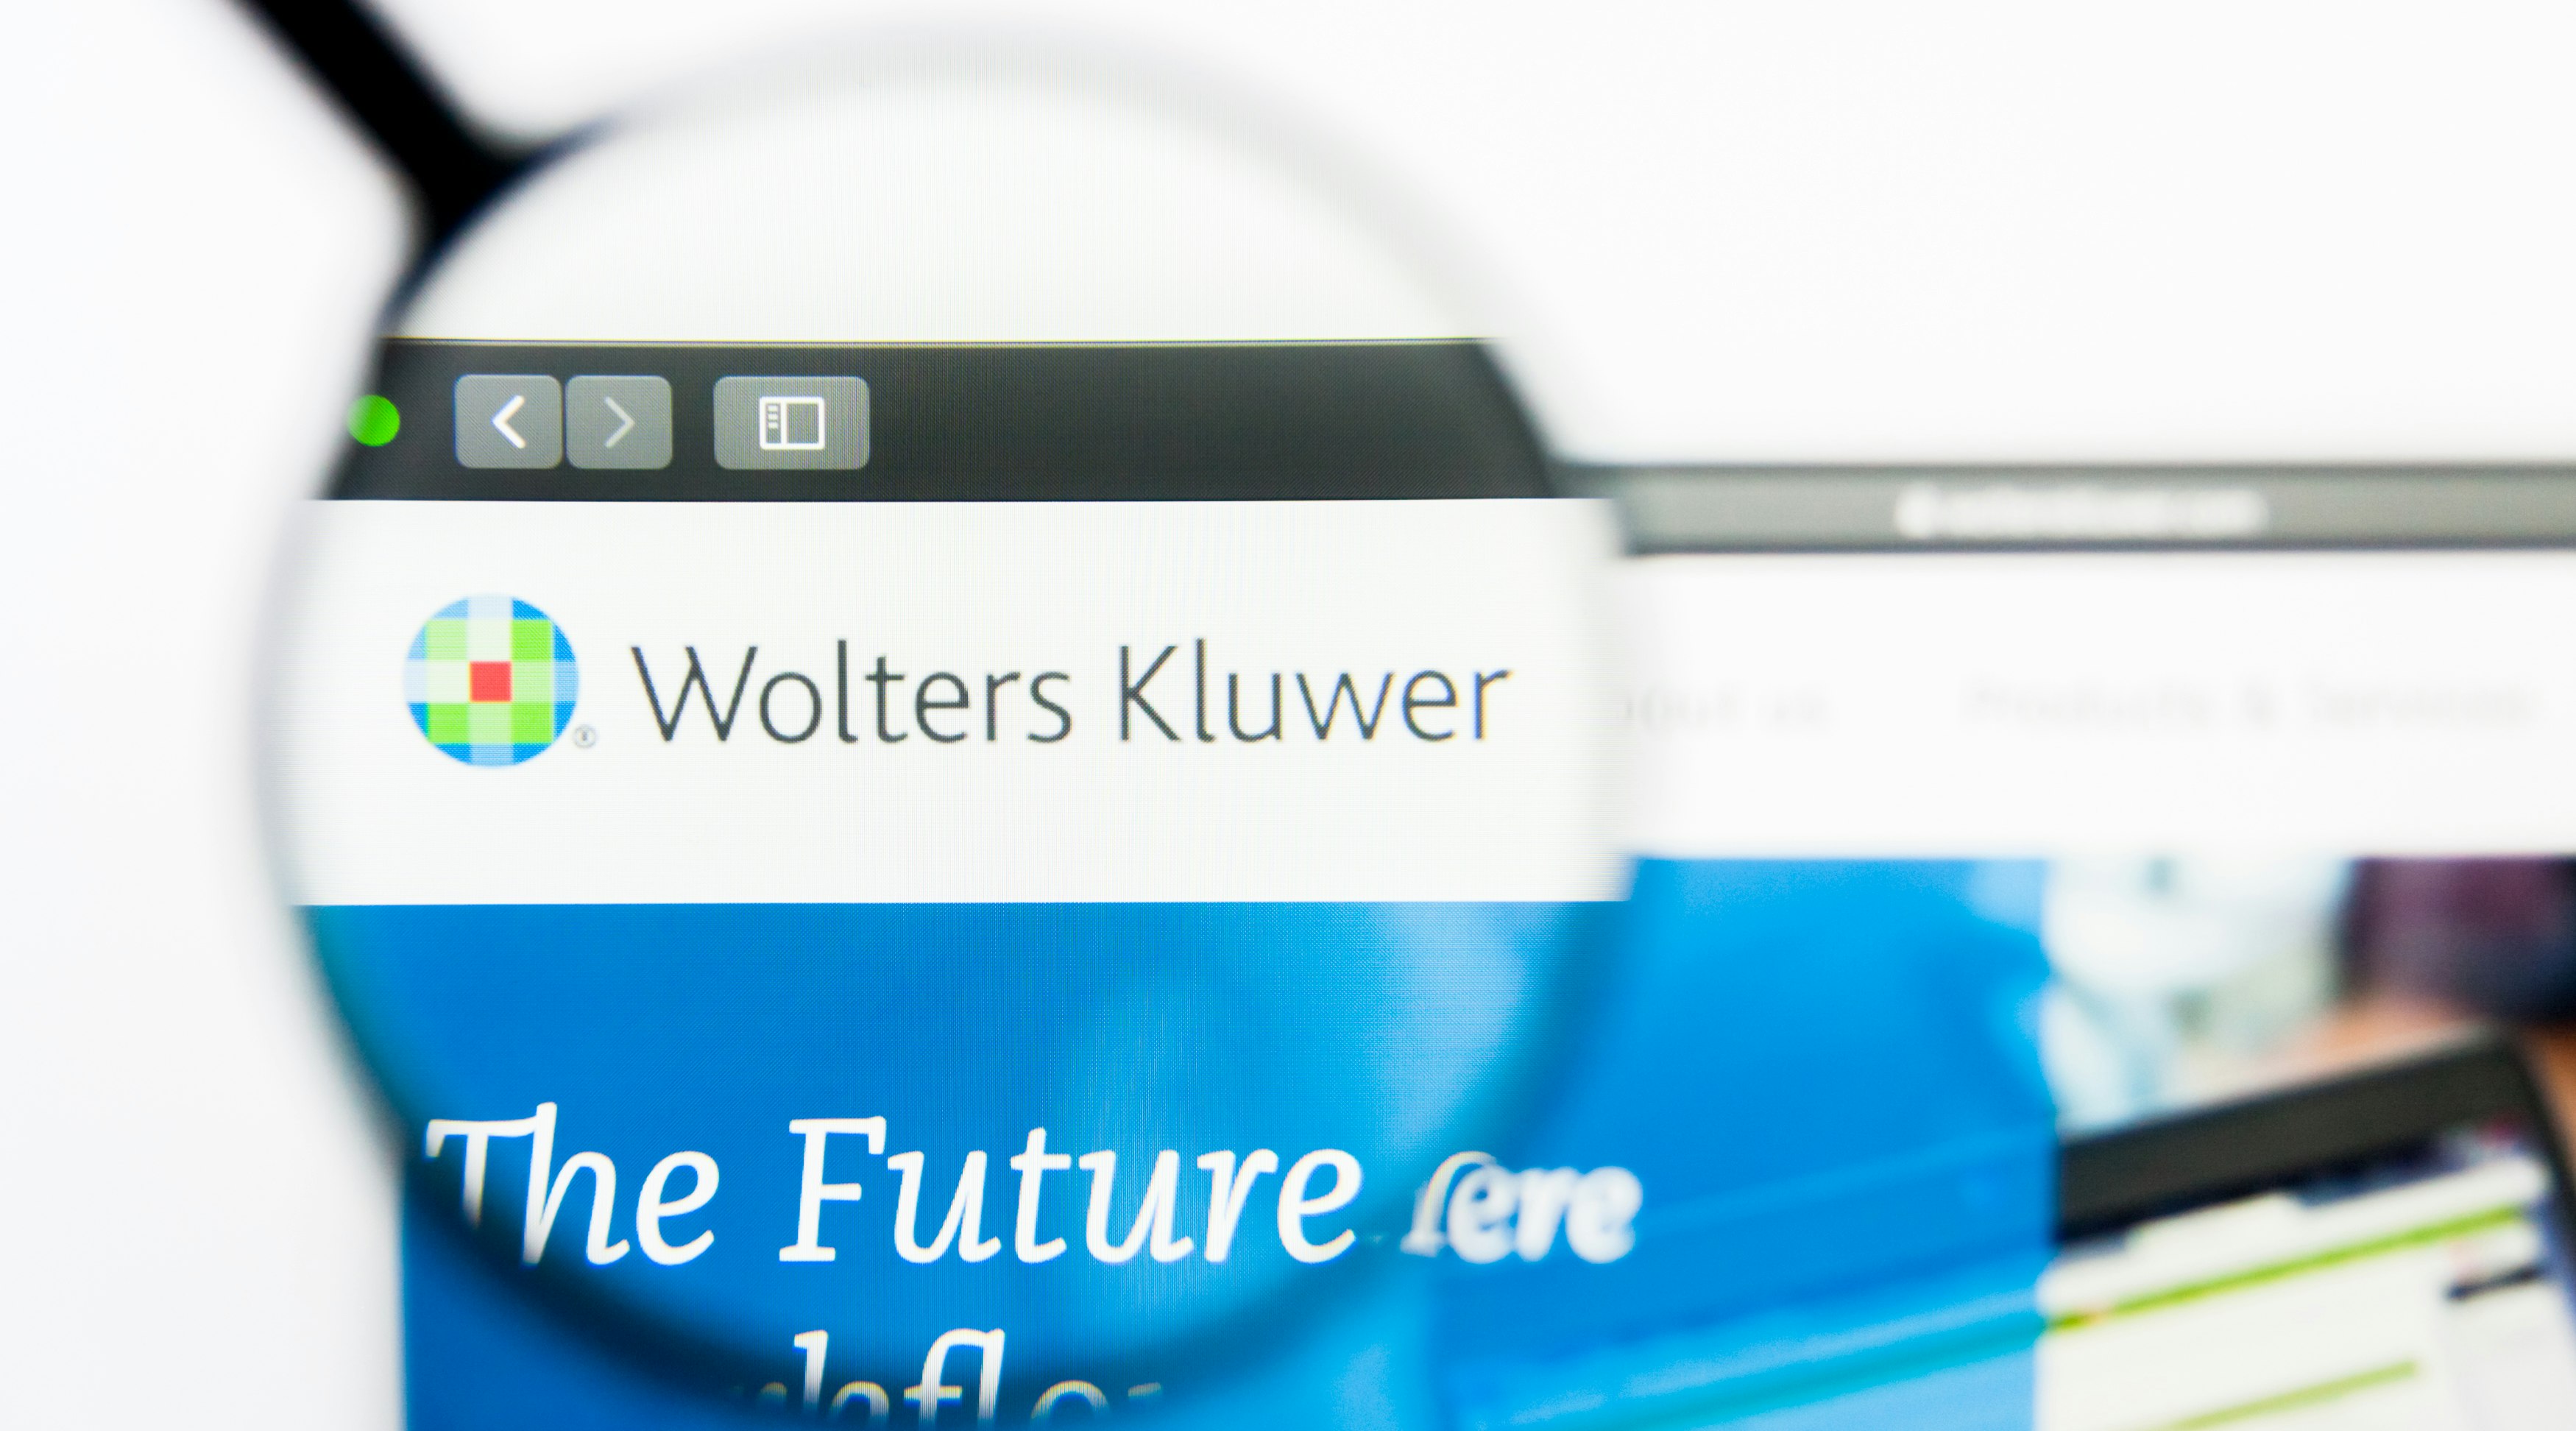 Wolters Kluwer in browser tab with magnifying glass